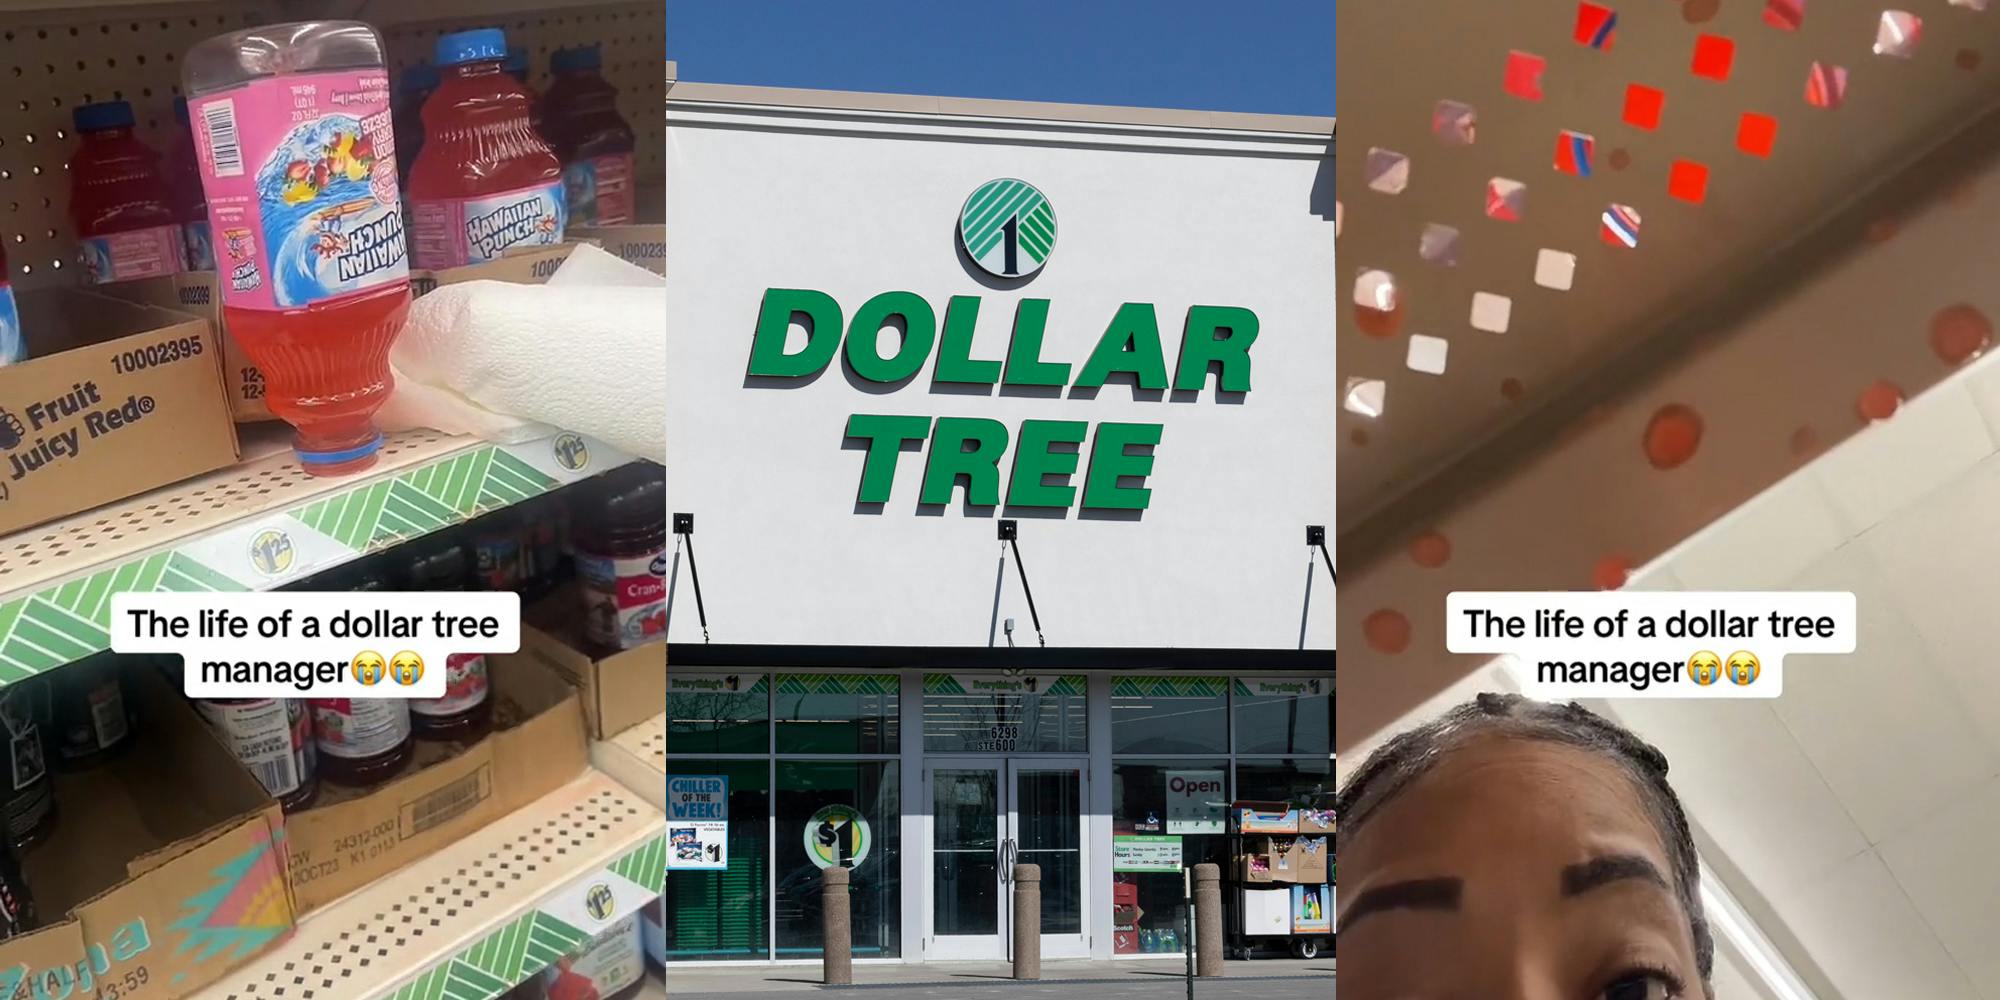 Dollar Tree Hawaiian Punch bottle upside down on shelf with caption "The life of a dollar tree manager" (l) Dollar Tree building entrance with sign (c) Dollar Tree Hawaiian Punch bottle upside down on shelf with cap off and manager with caption "The life of a dollar tree manager" (r)